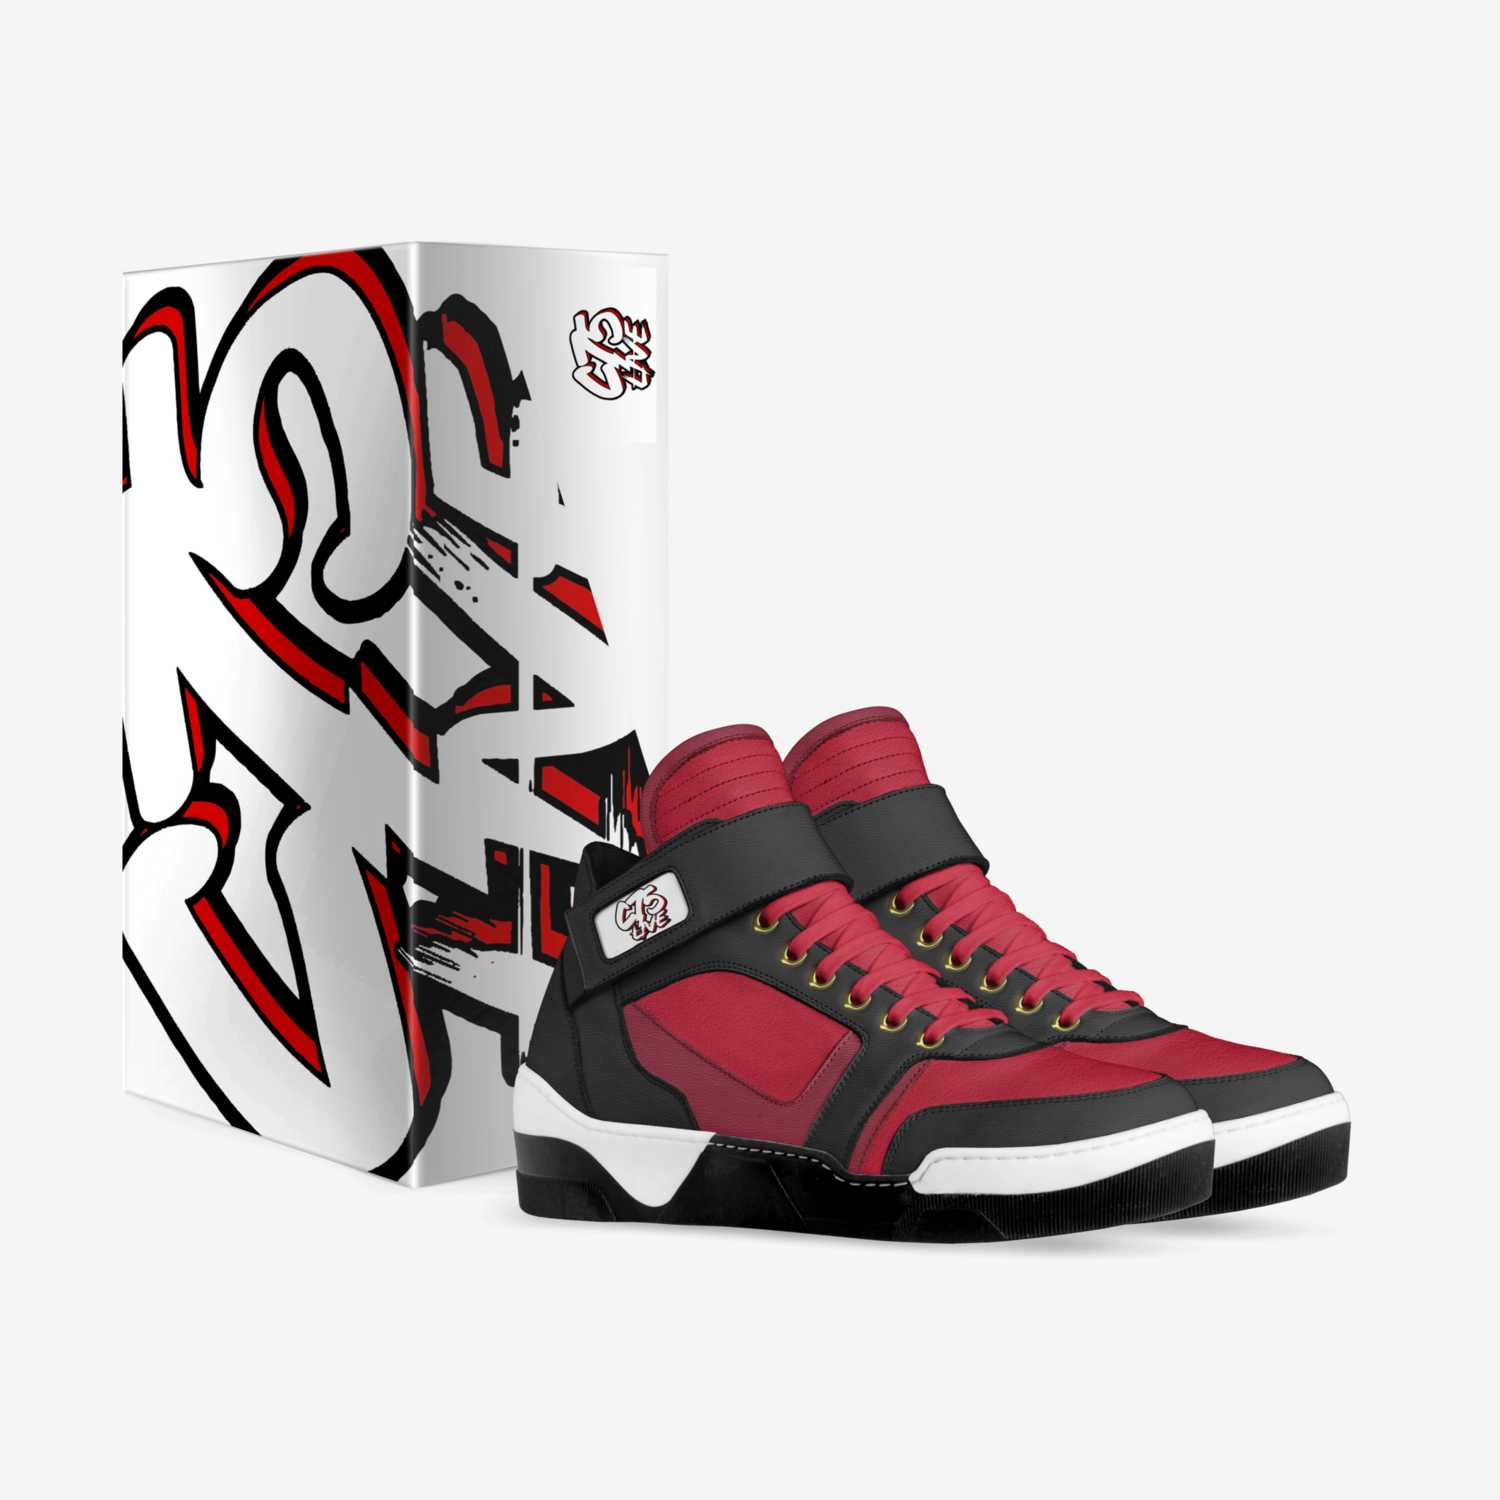 C75 Live custom made in Italy shoes by C75 Live | Box view